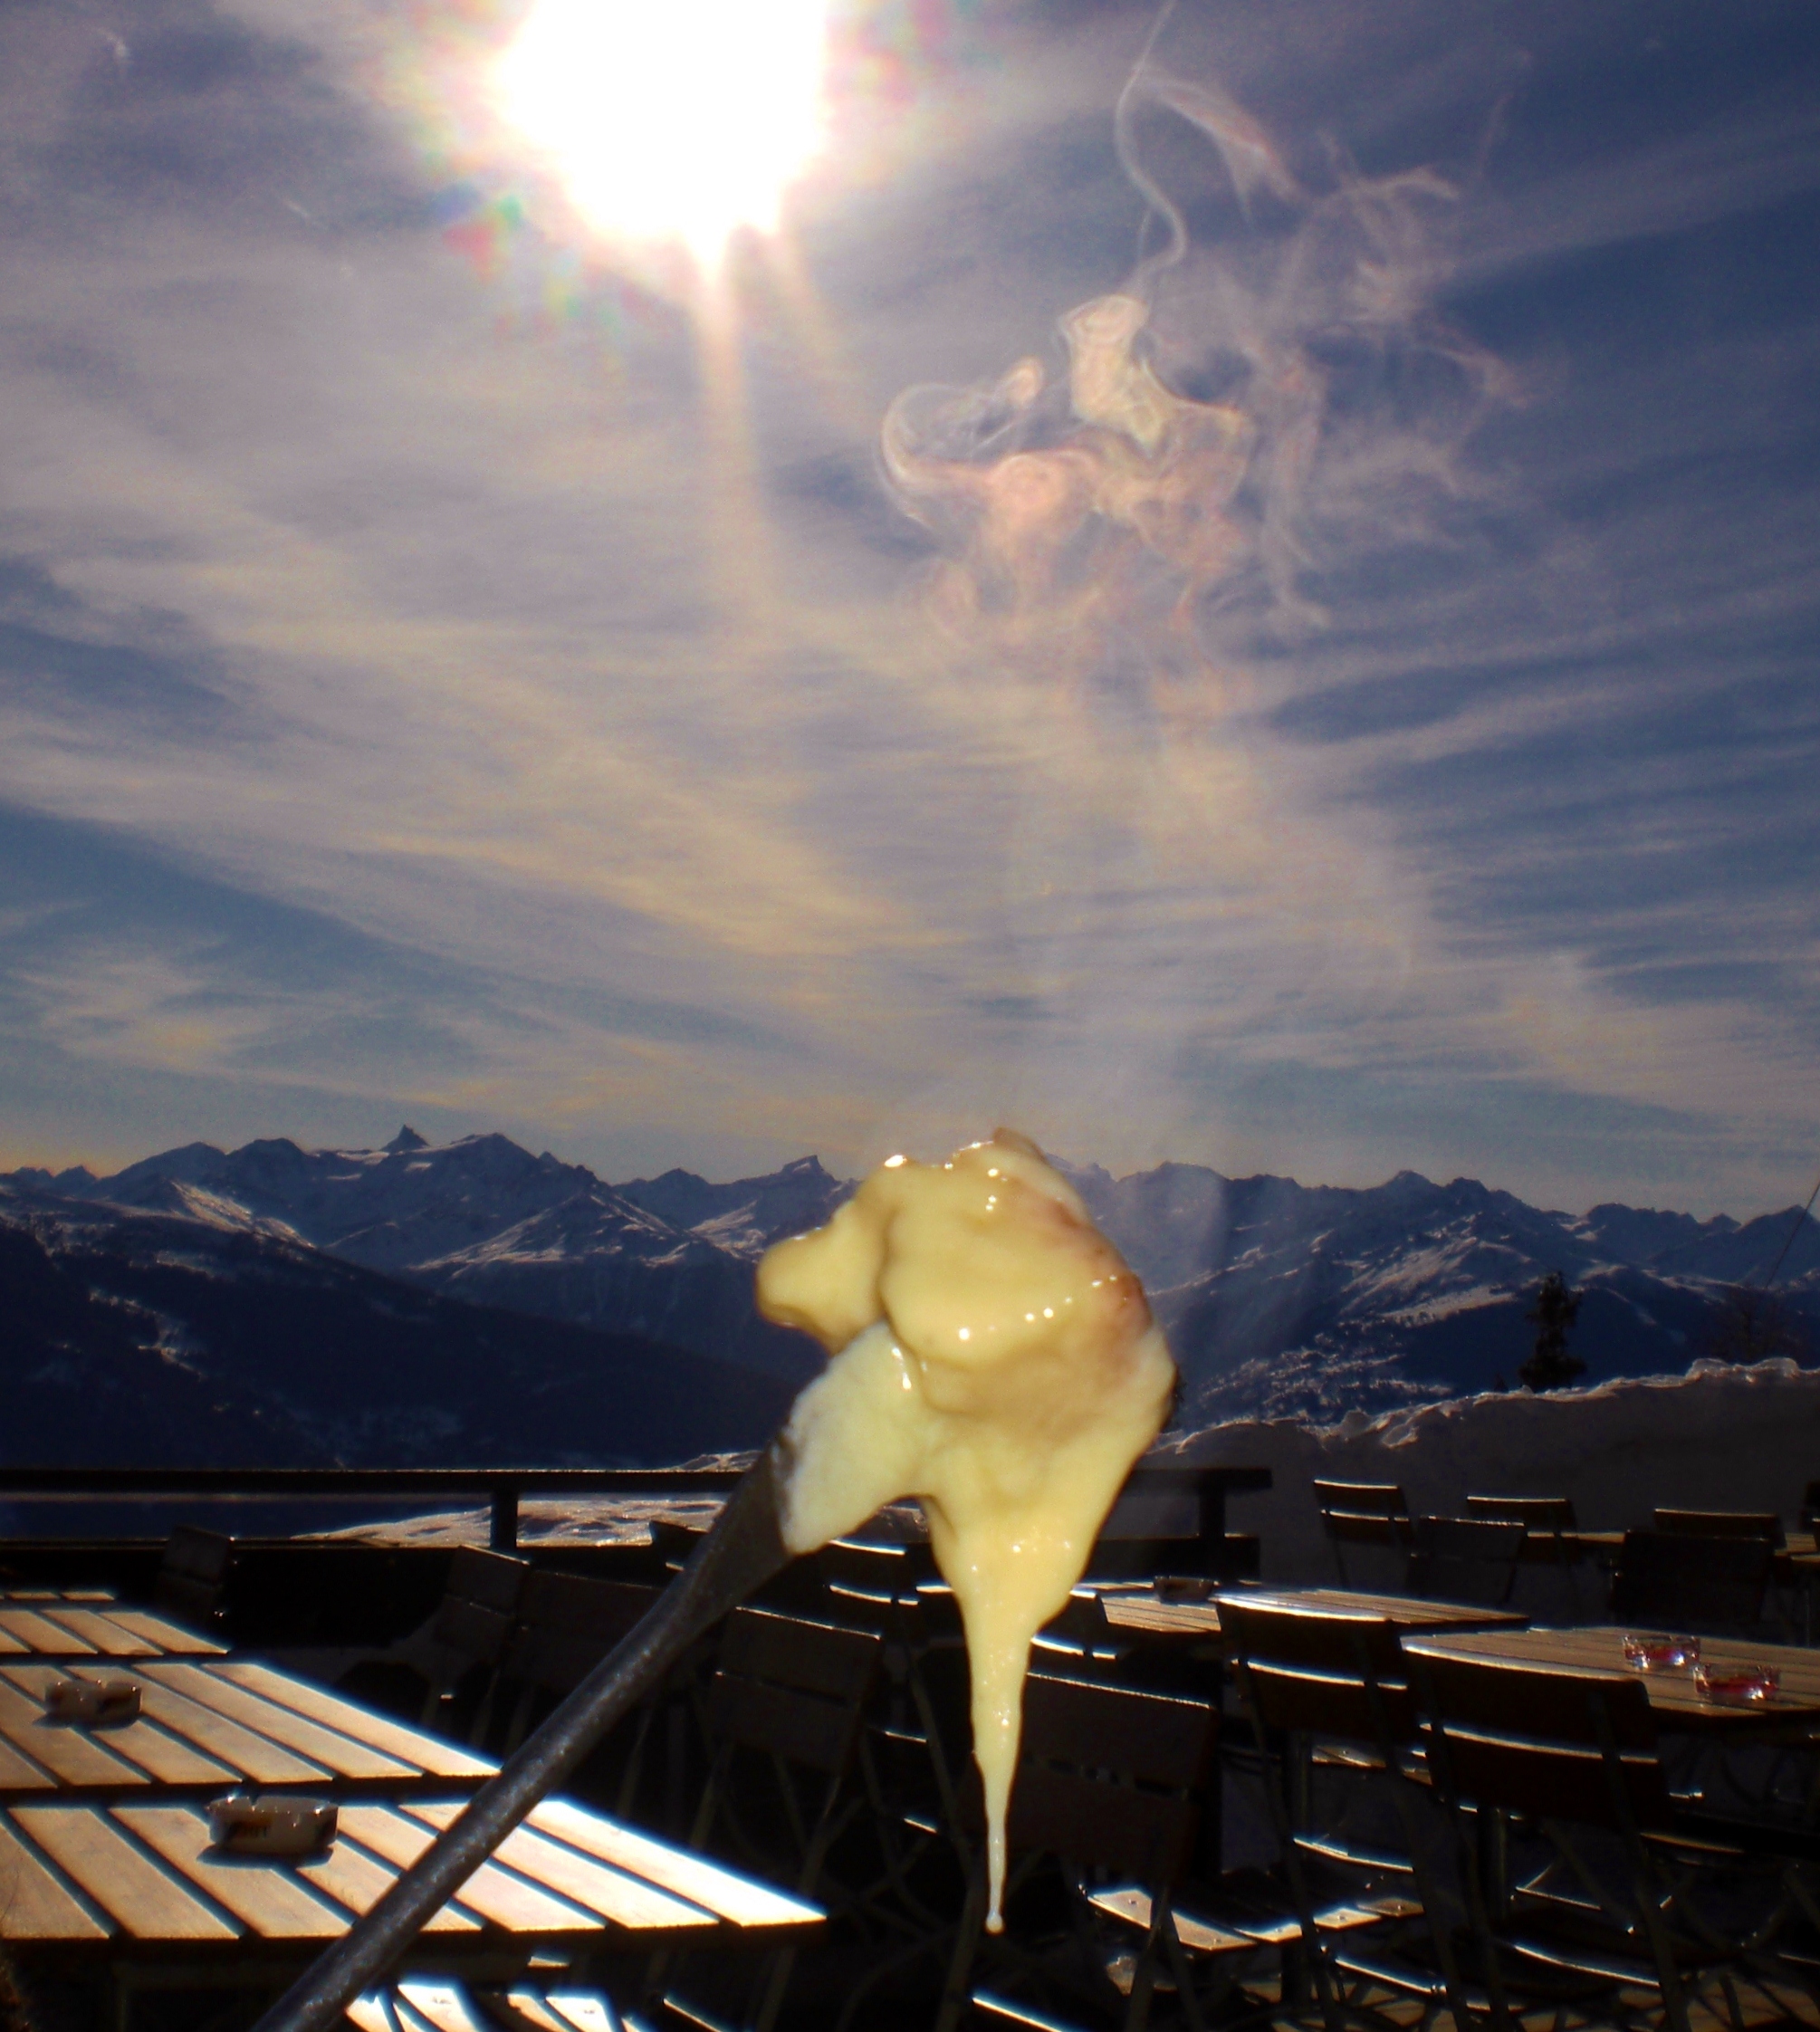 Beatrice's beloved Swiss alps with cheese fondue